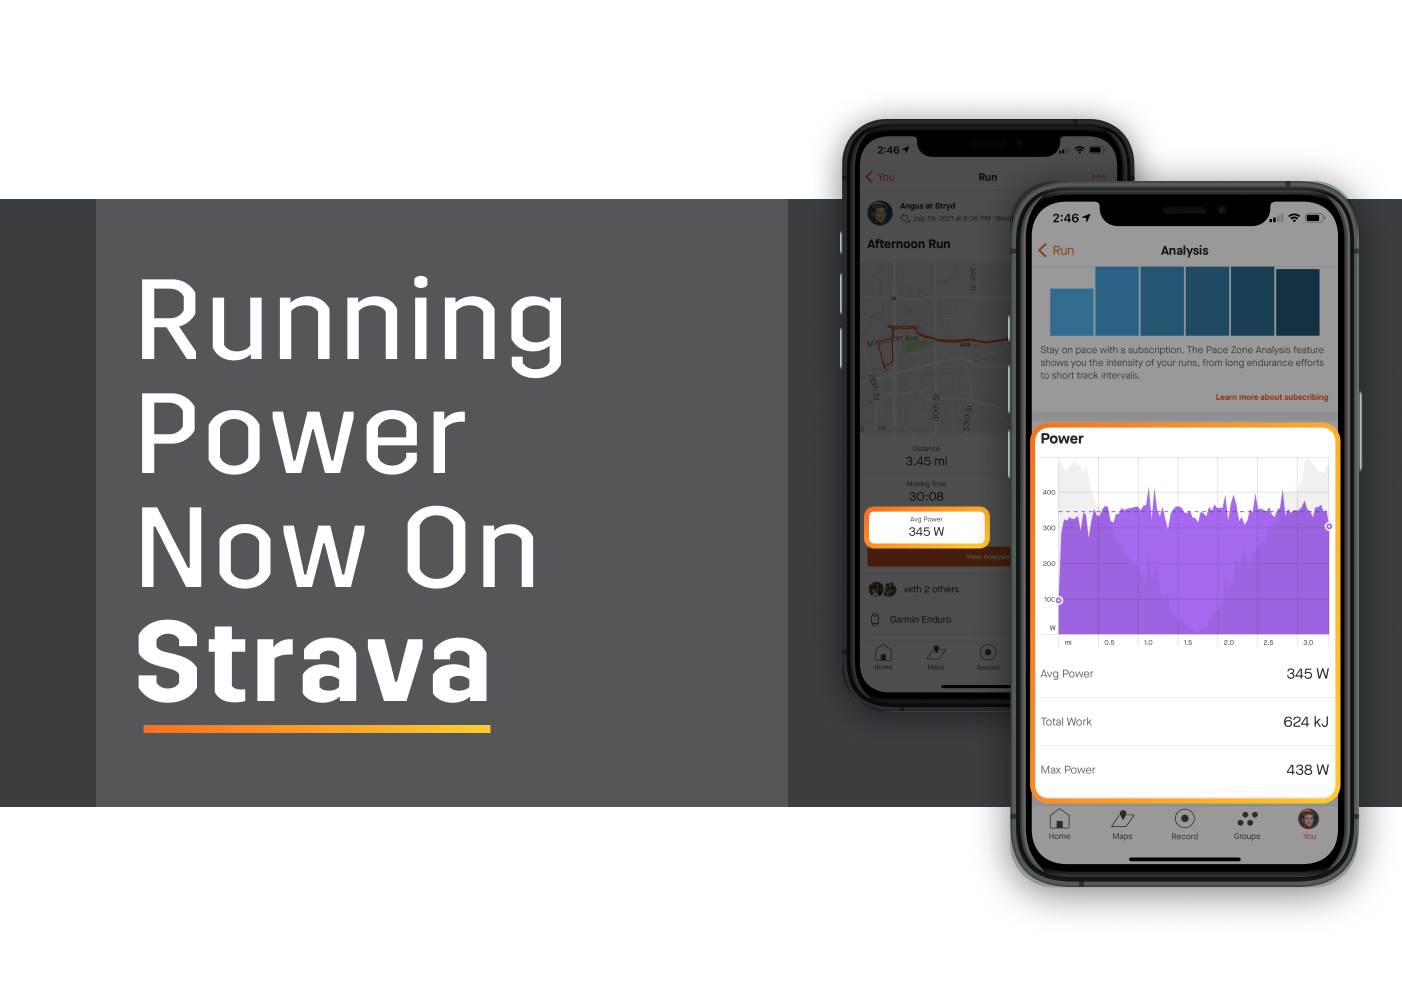 Running power is now displayed in the Strava mobile app